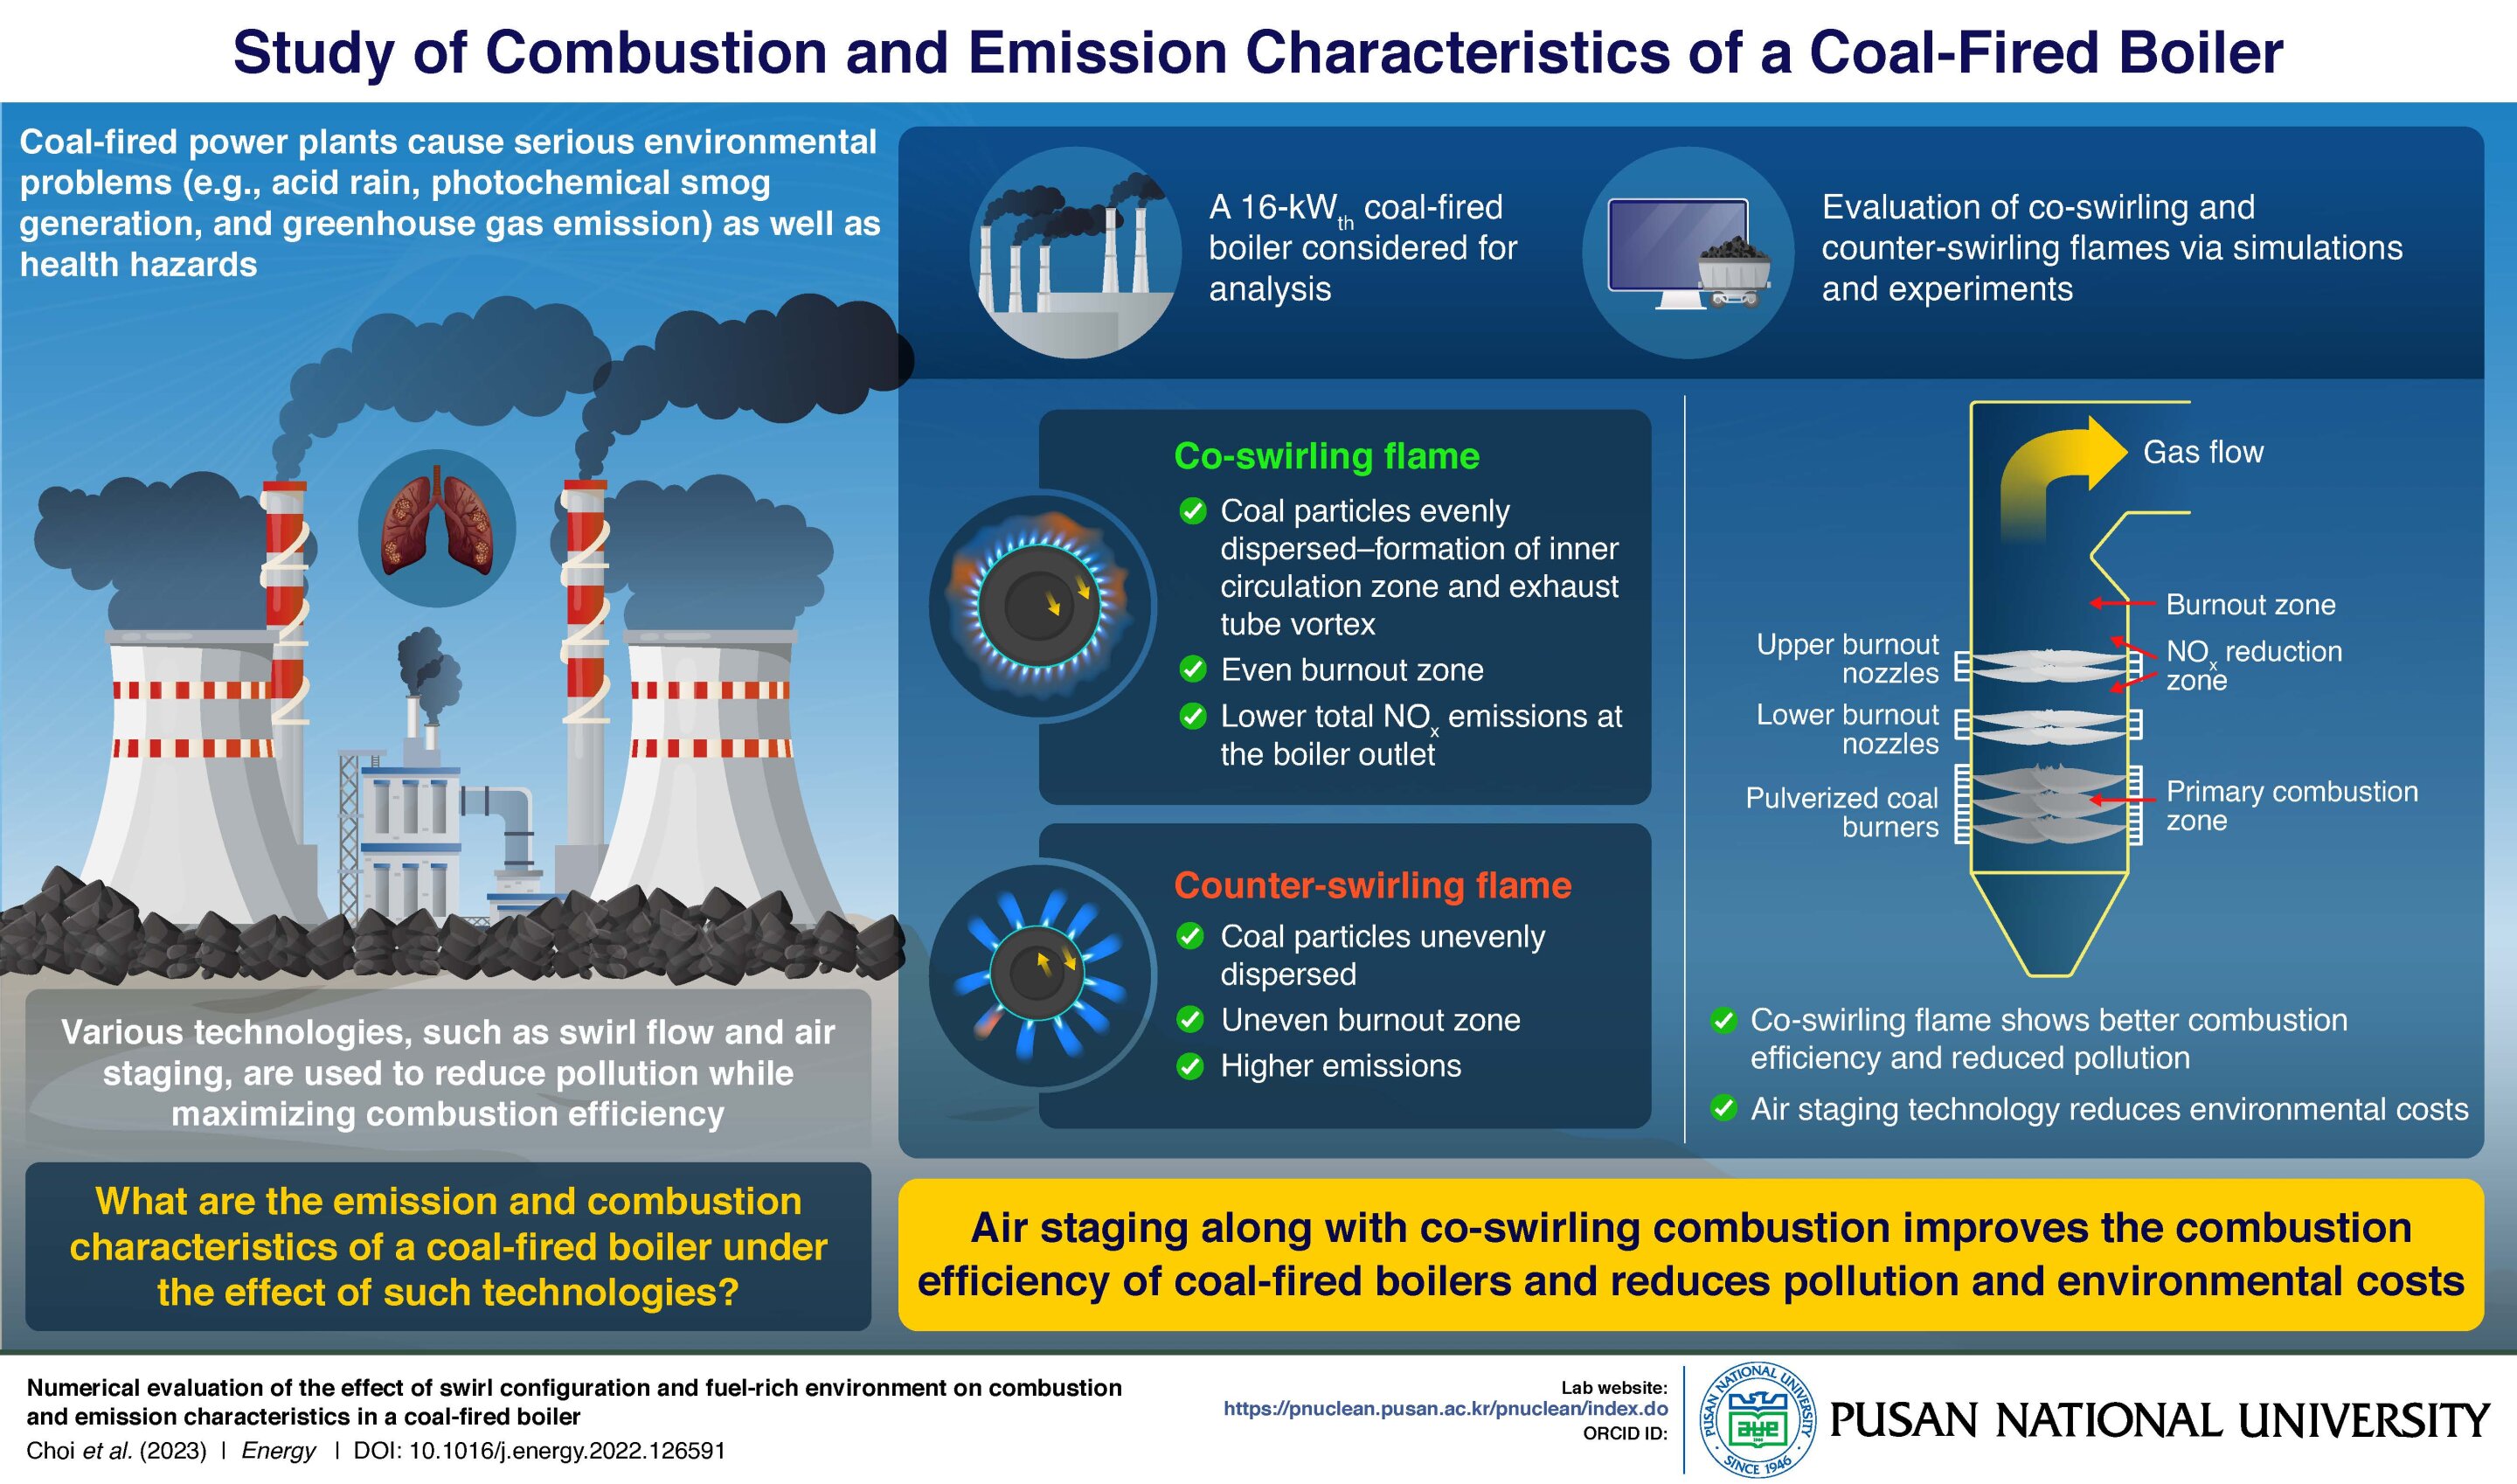 Researchers examine combined effects of two combustion technologies on the emission of coal-fired boilers